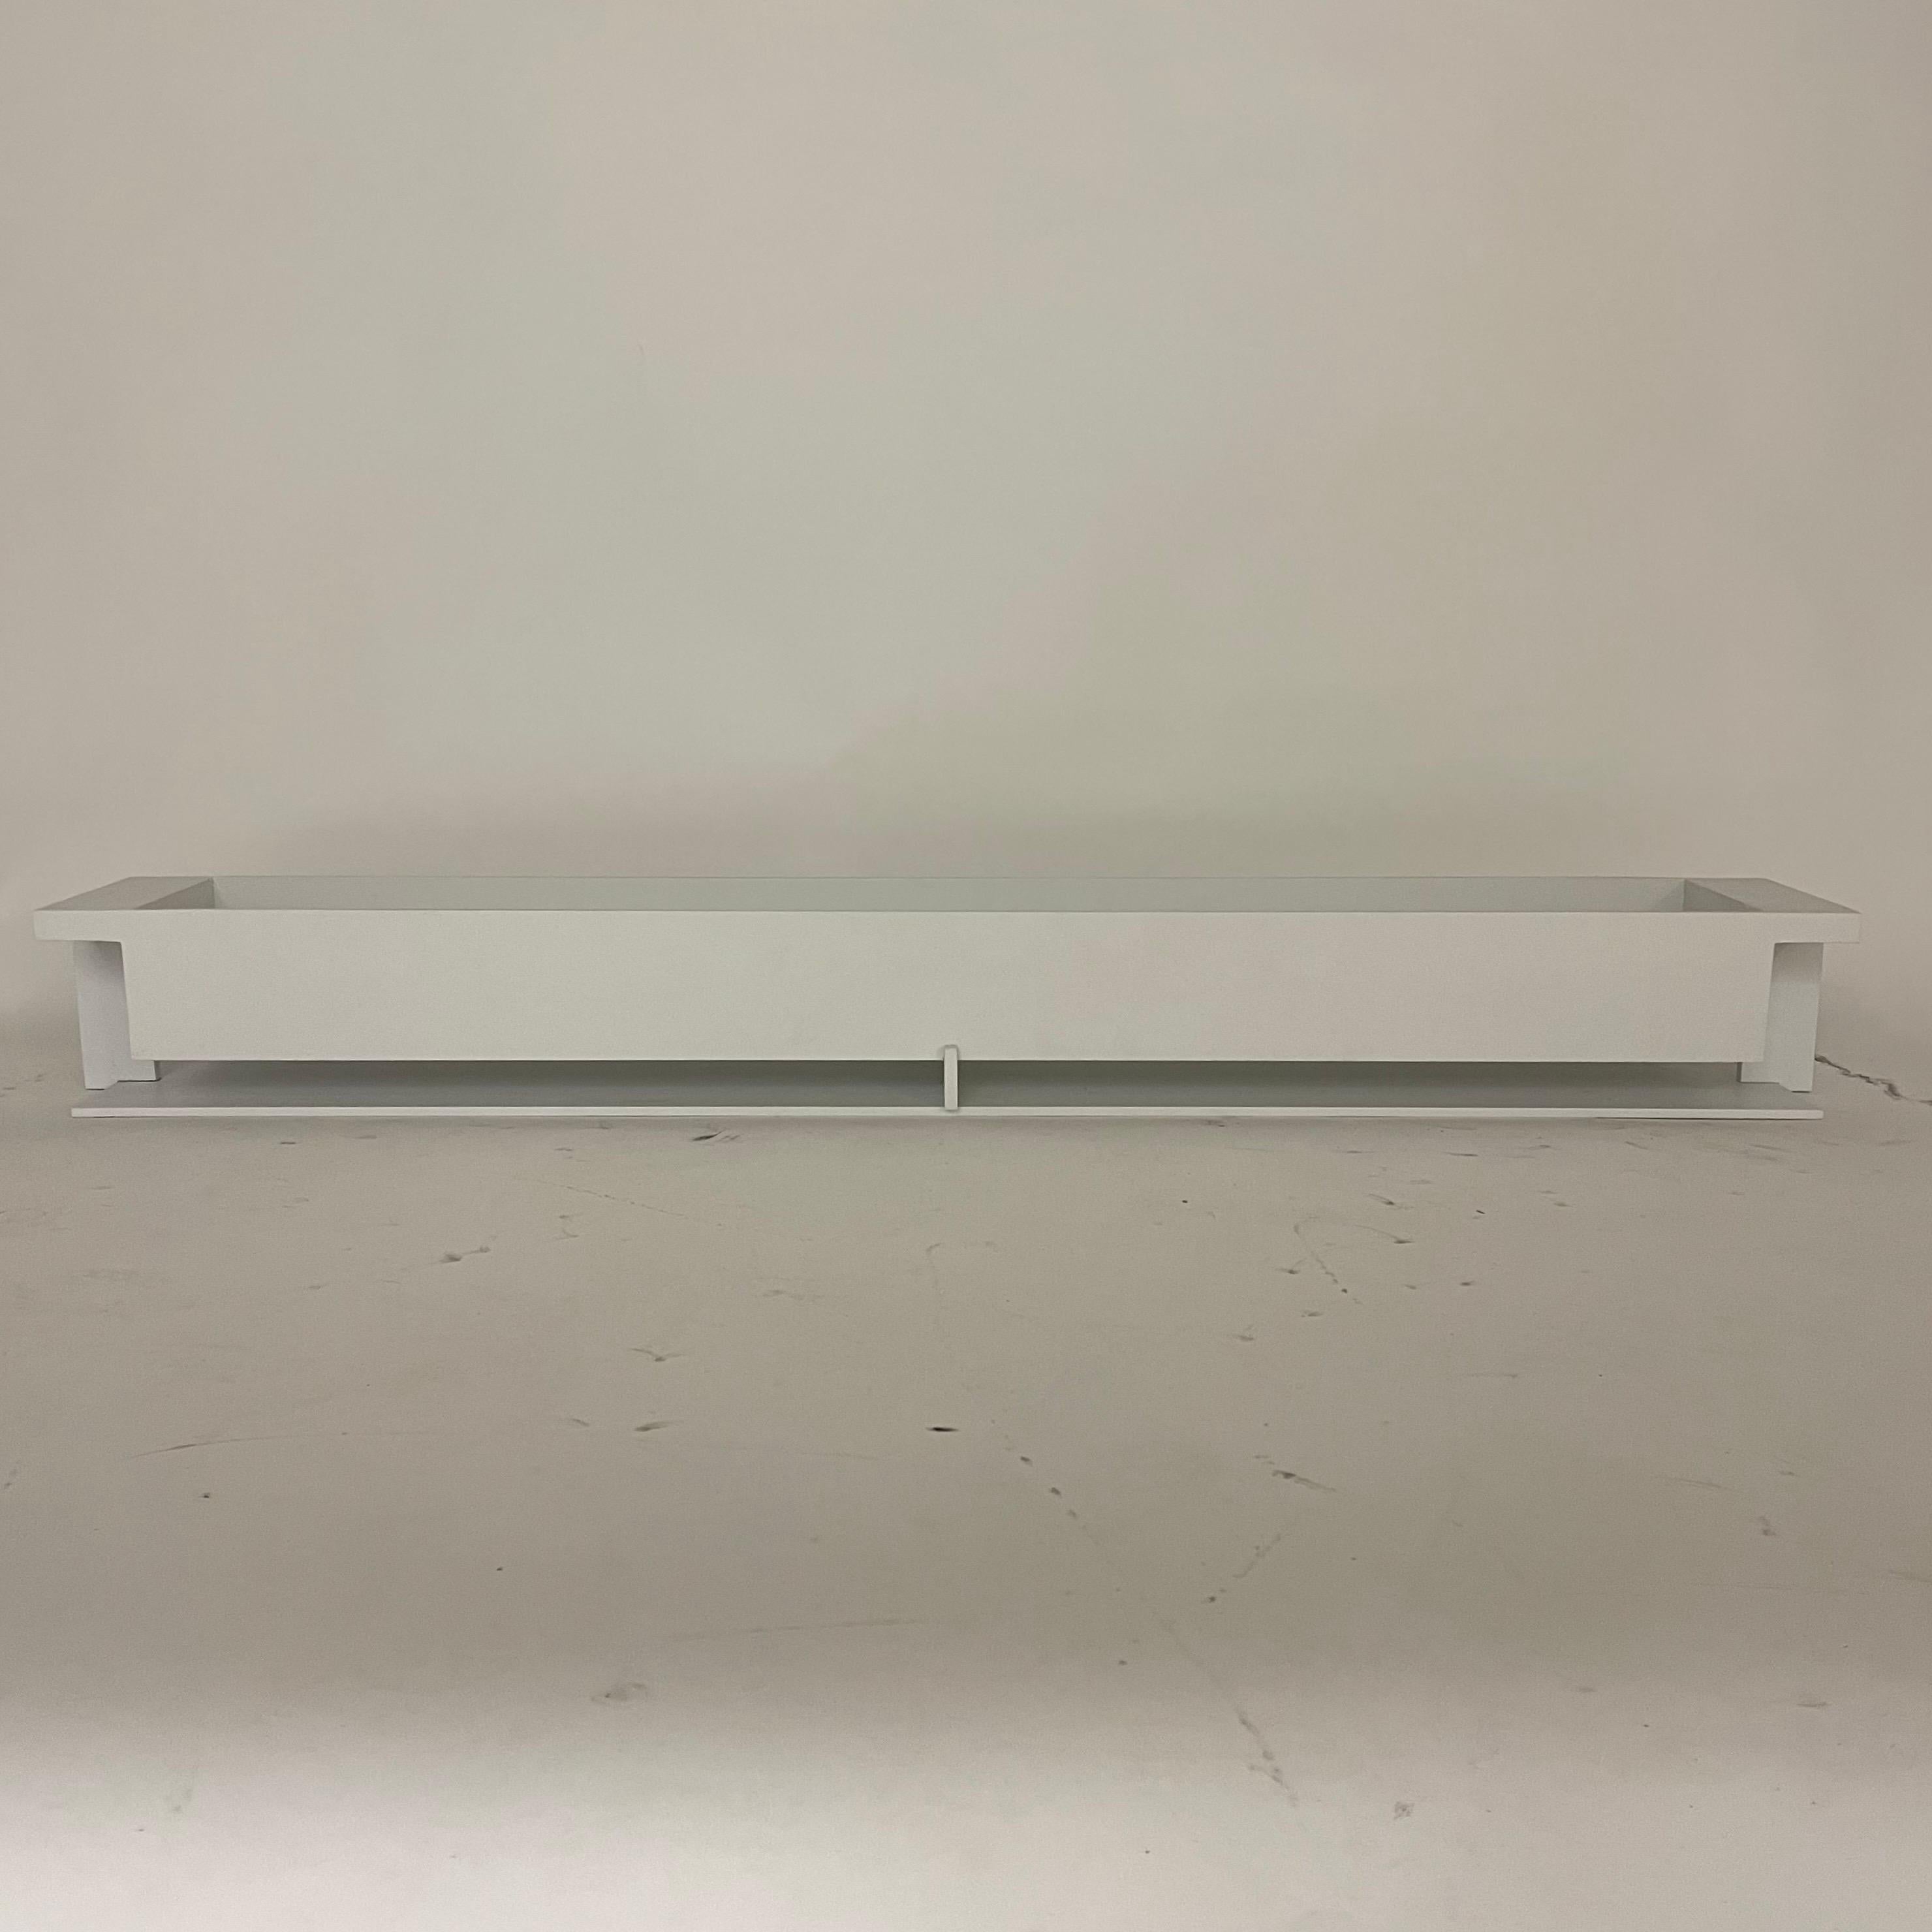 Powder-Coated Frank Lloyd Wright Style Modernist White Powder Coated Cold Steel Planter, USA For Sale